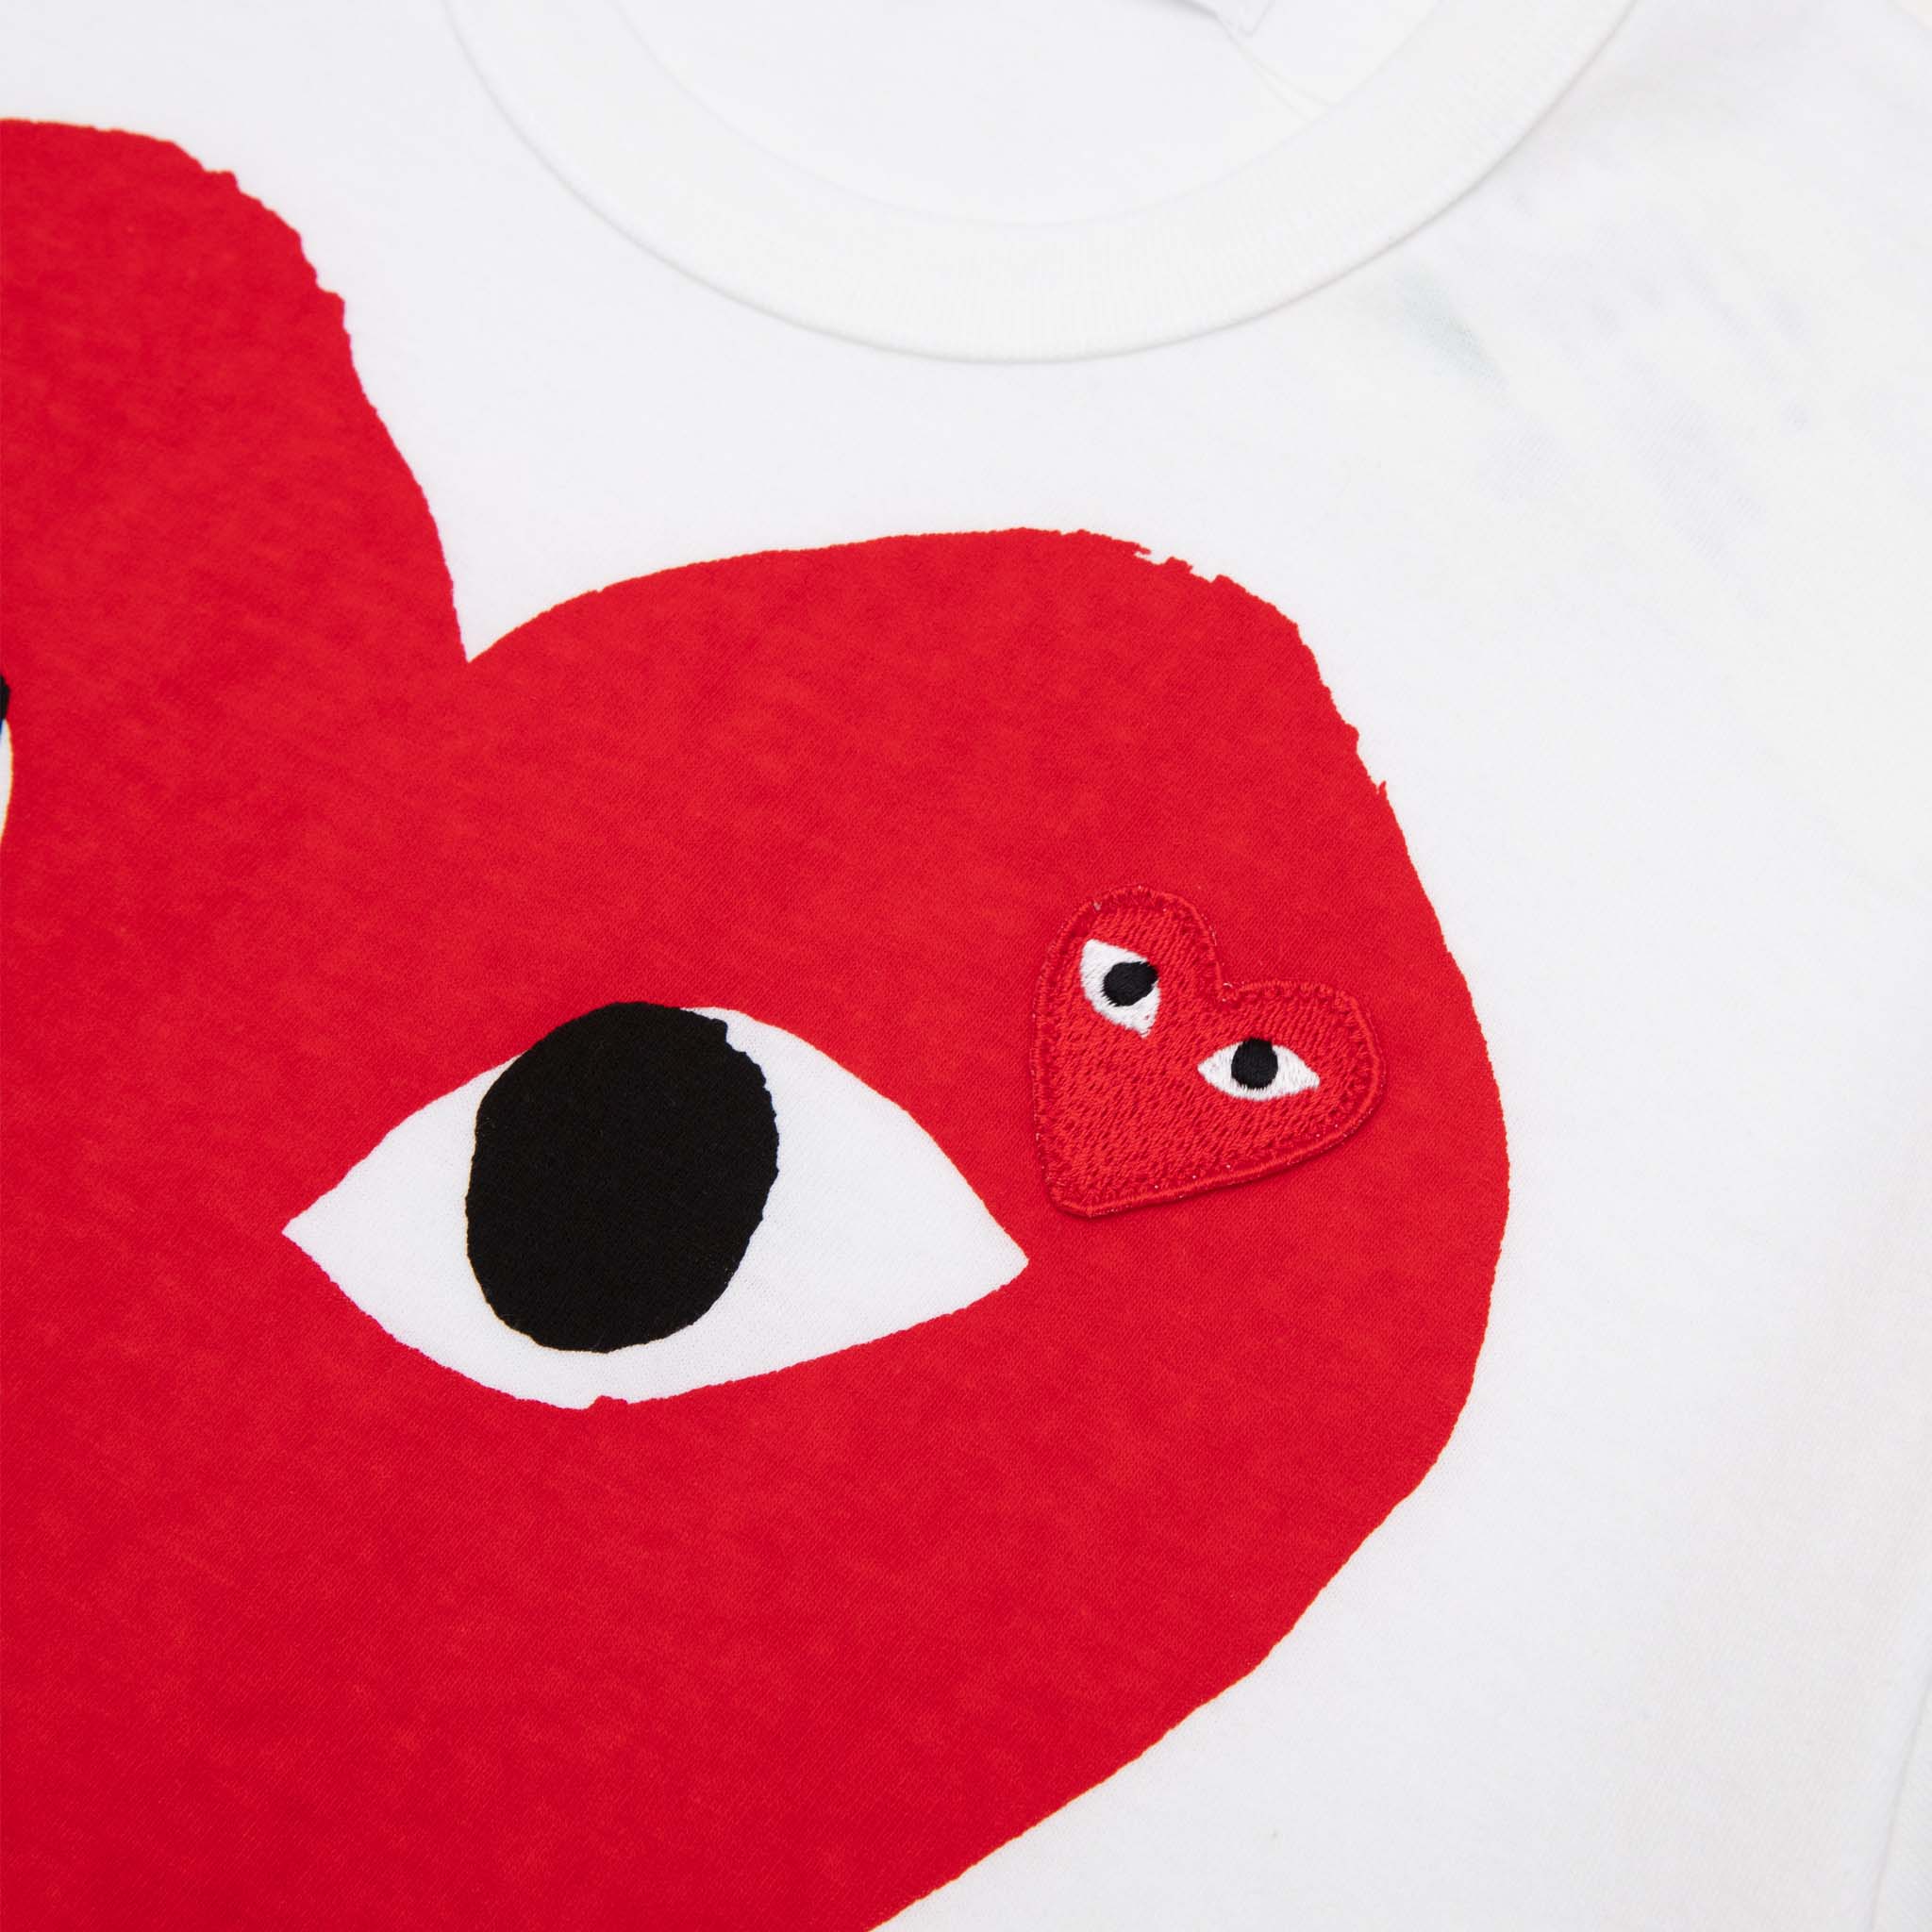 RED BIG HEART S/S T-SHIRT